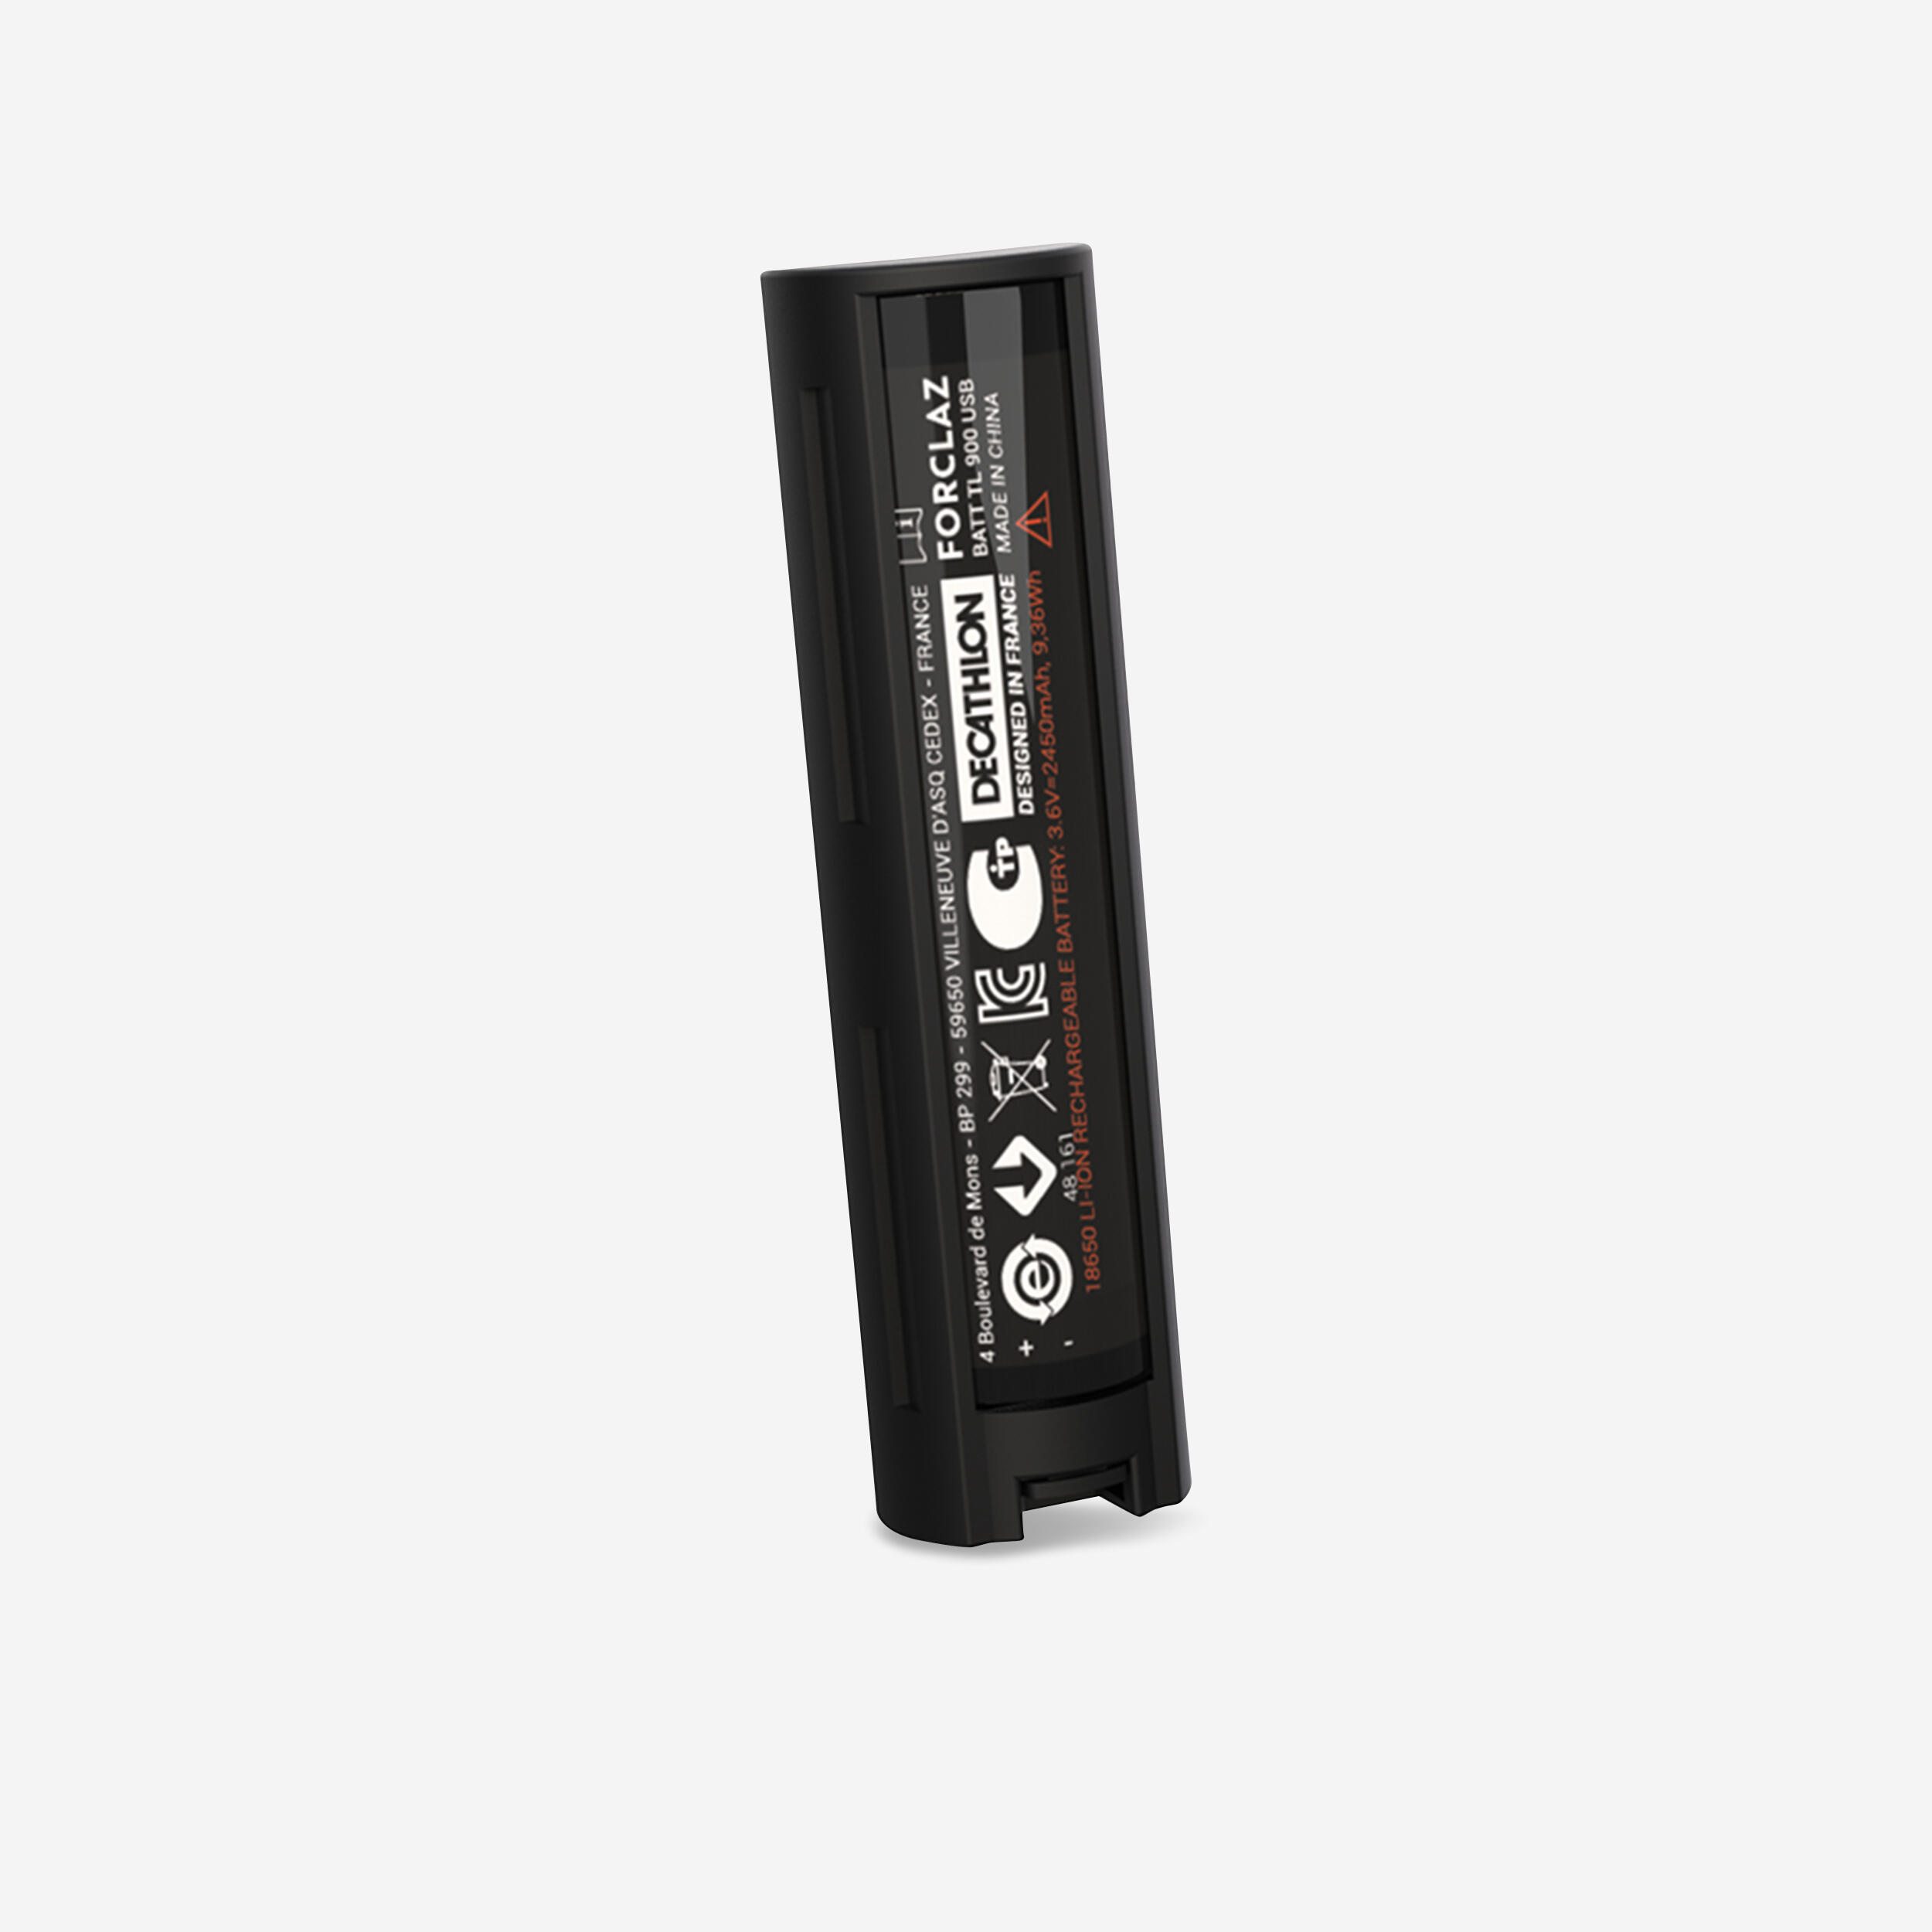 Replacement torchlight battery - 2,450 mAh - TL900 1/1